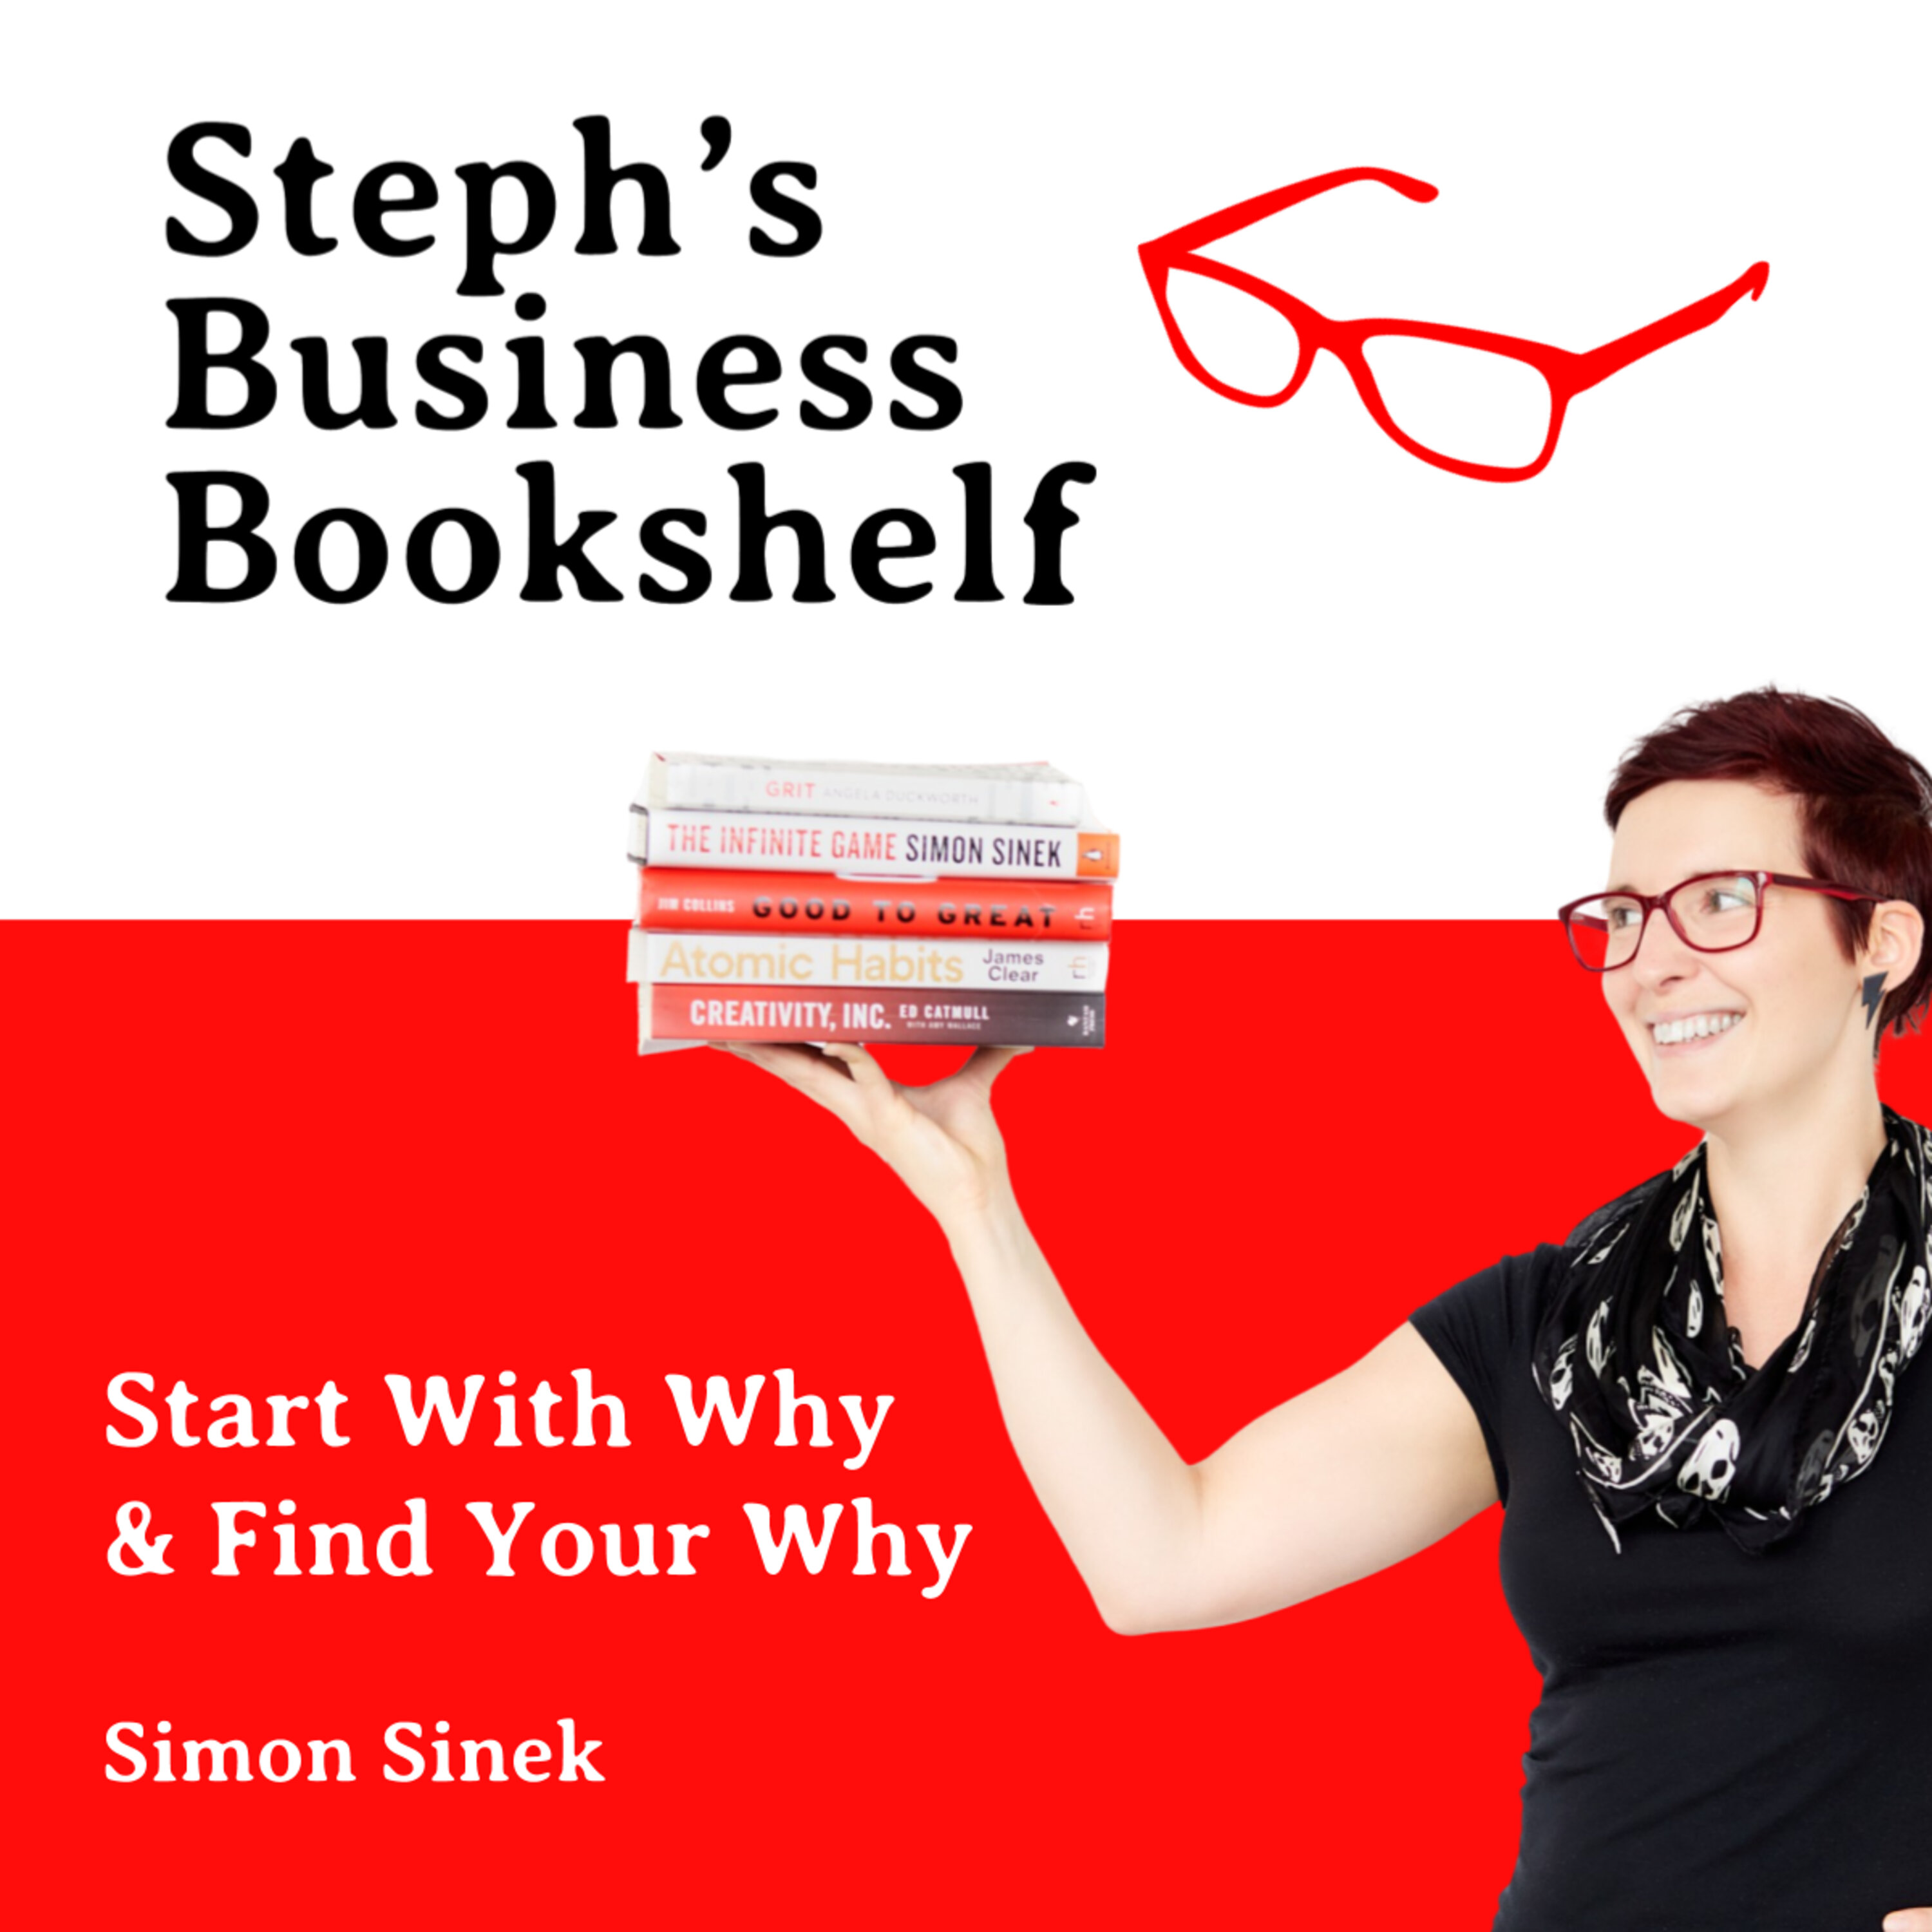 Start With Why & Find Your Why by Simon Sinek: How to stop being boring and be more interesting